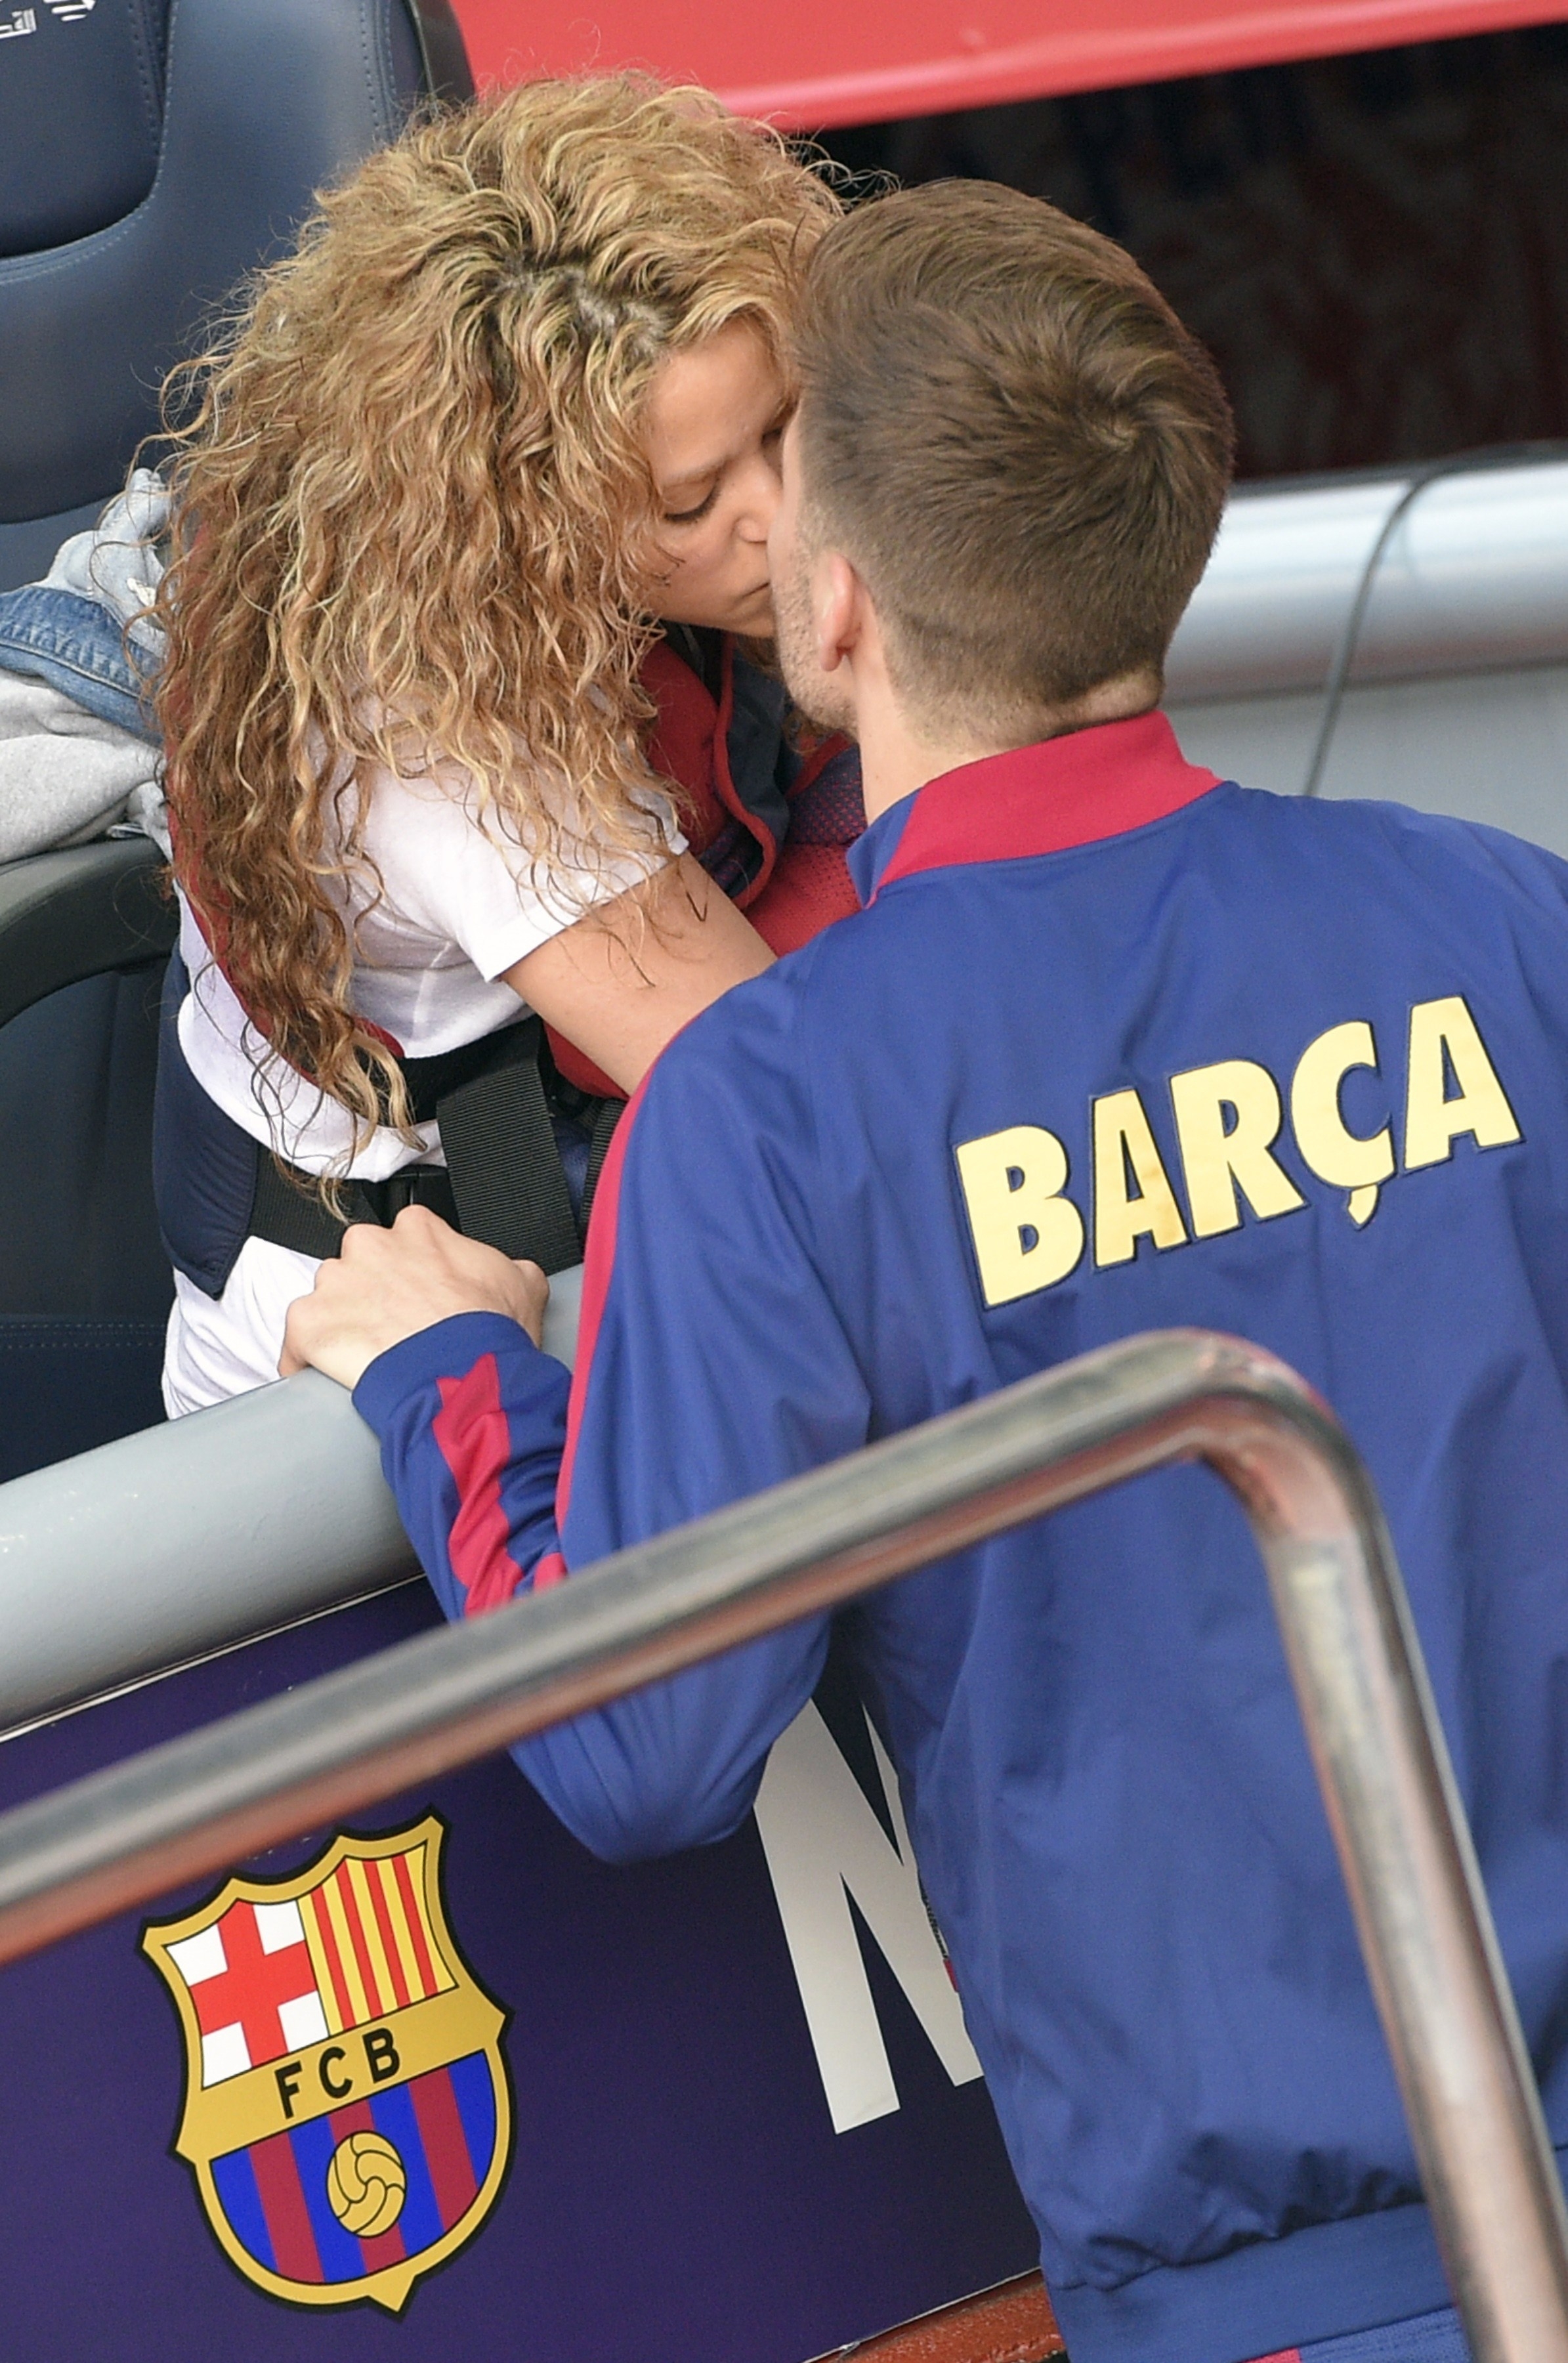 Shakira and Gerard Piqué share a kiss, Shakira in a sleeveless top and Piqué in a BARCA jacket